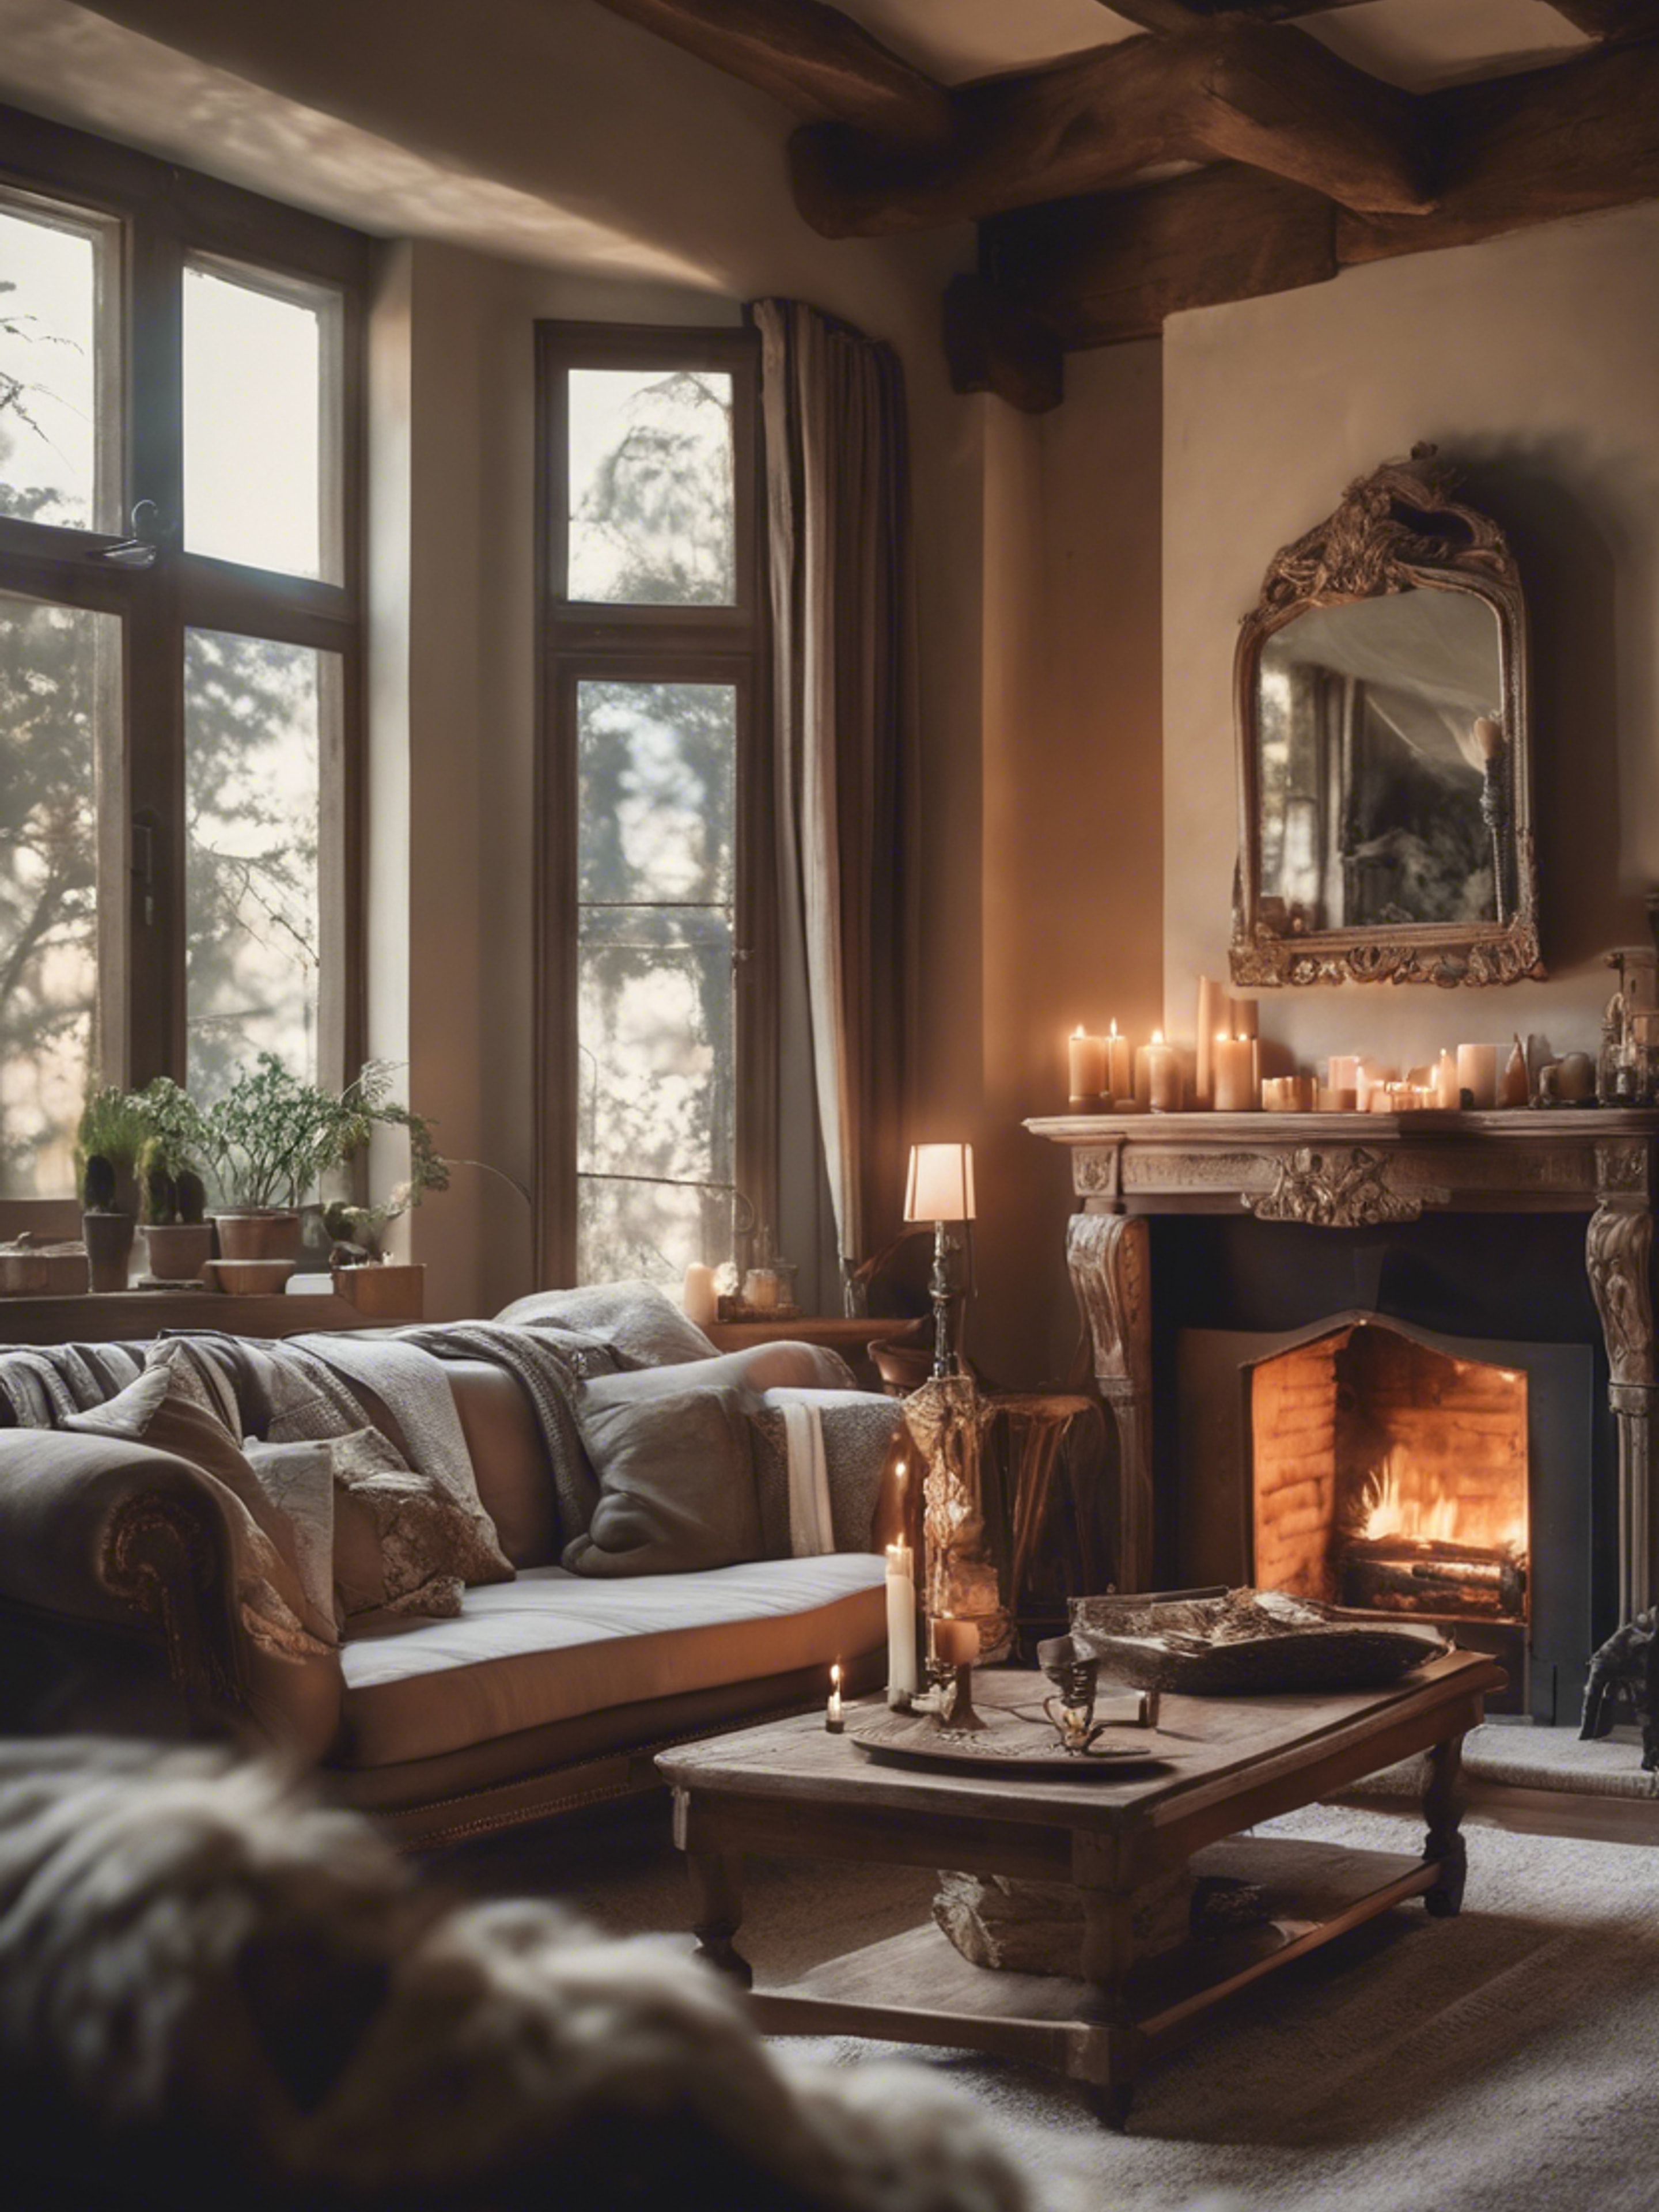 A French country style living room, cozy and comfortable with a roaring fireplace, antique furniture, and soft candlelight.壁紙[b1f658778f85425ba676]